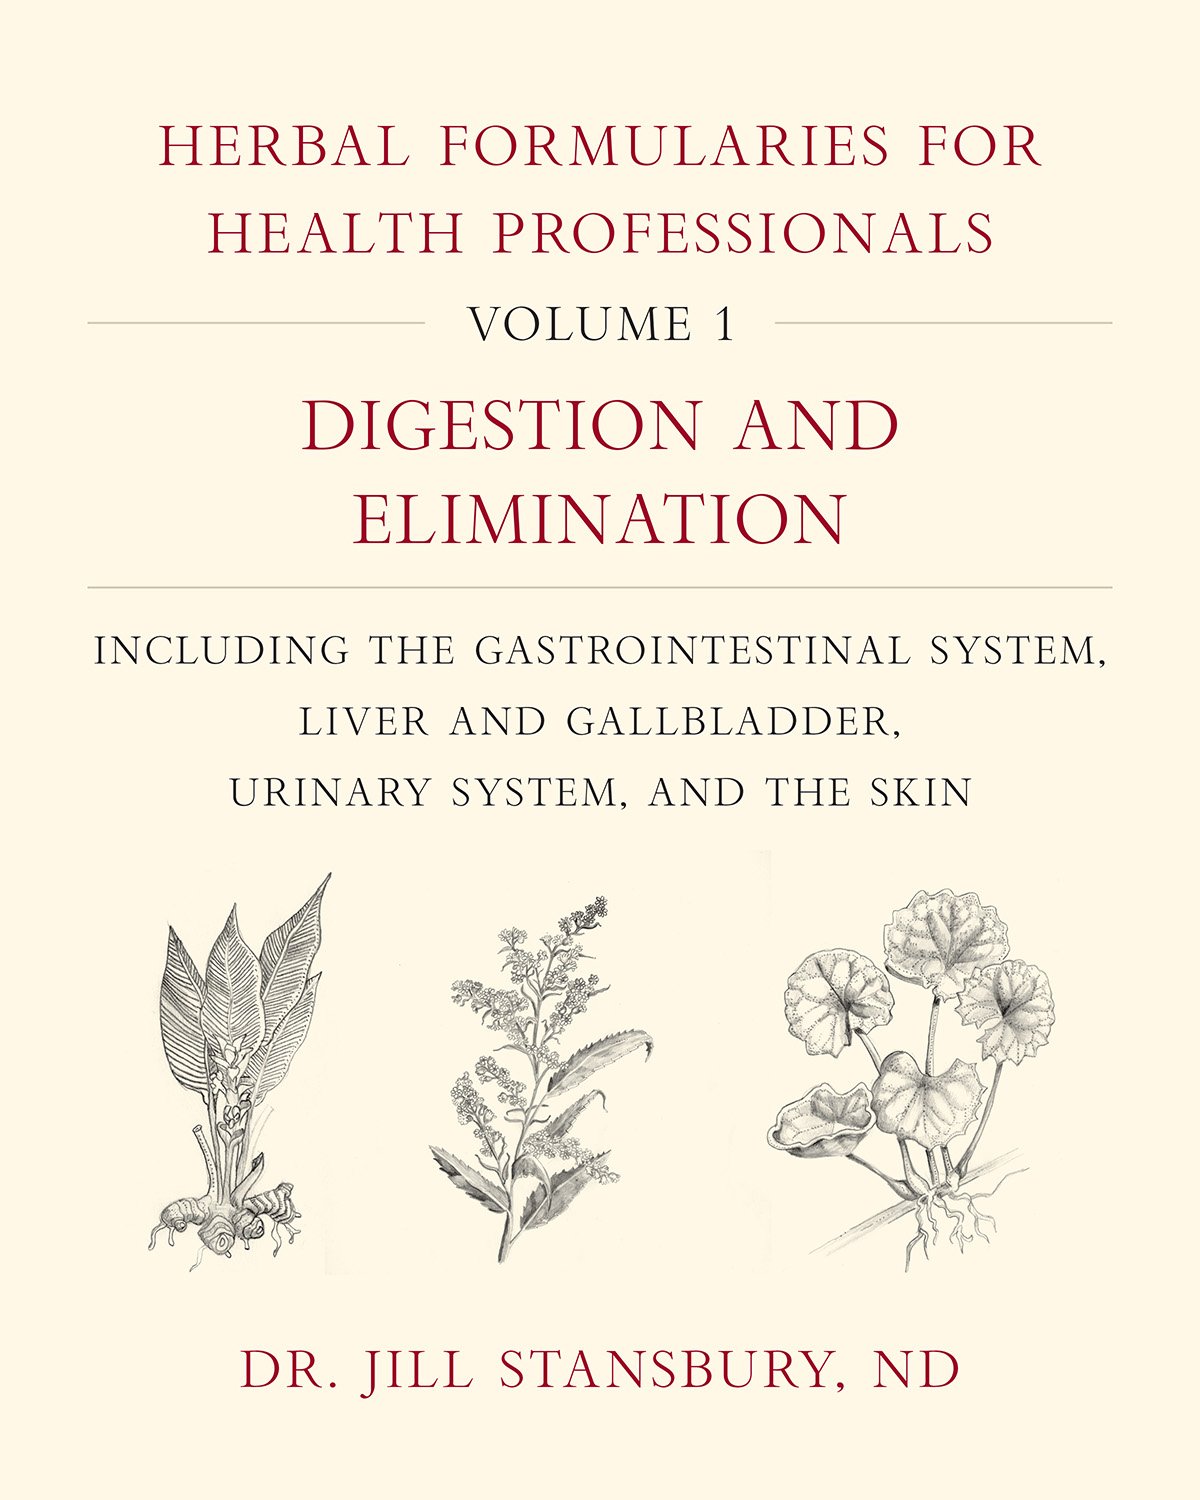 The Herbal Formularies for Health Professionals